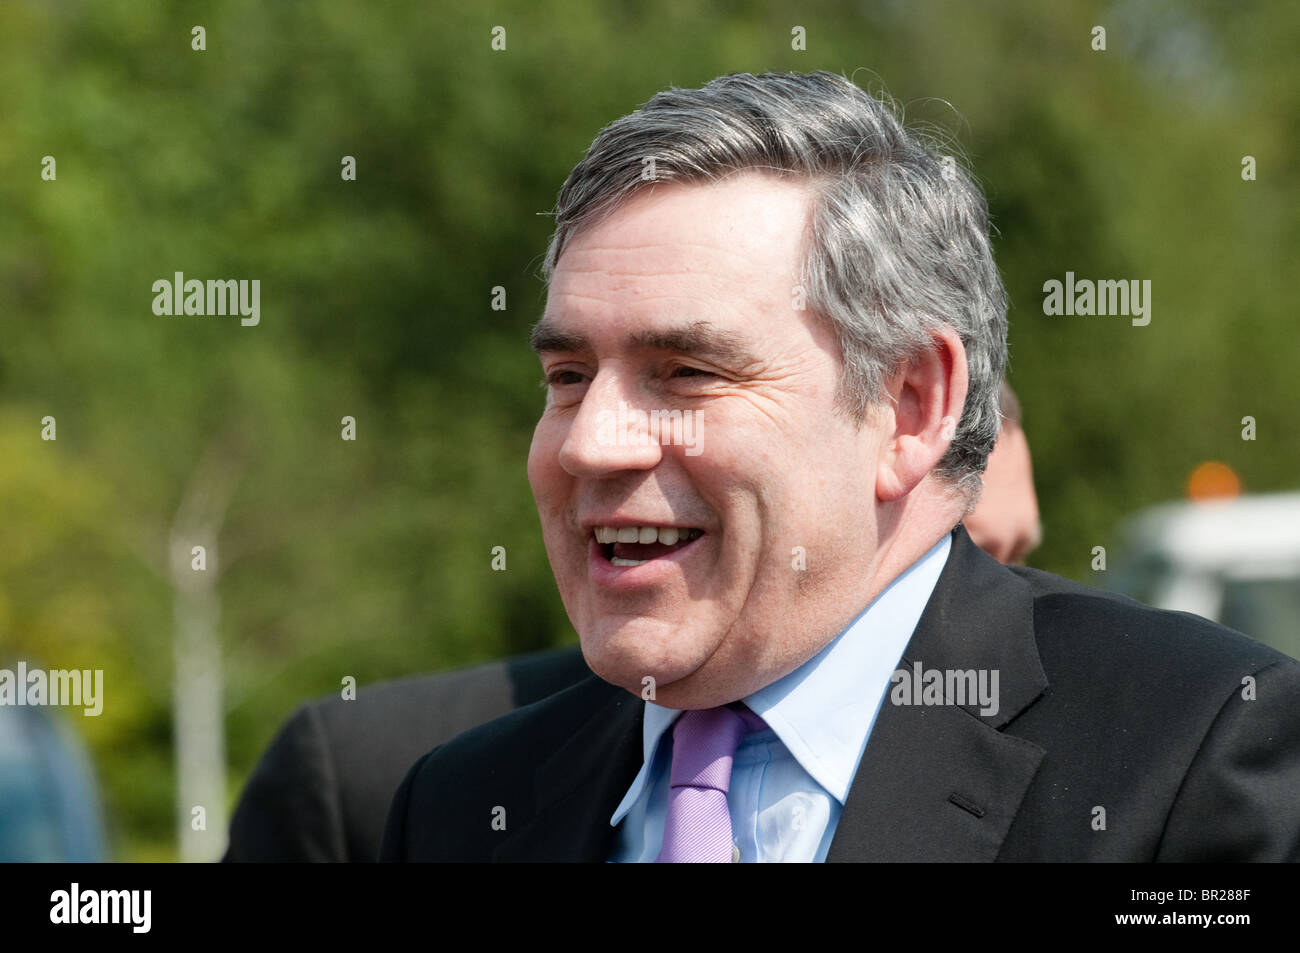 A smiling Prime Minister, Gordon Brown arriving on an official election campaign visit in Telford, UK Stock Photo